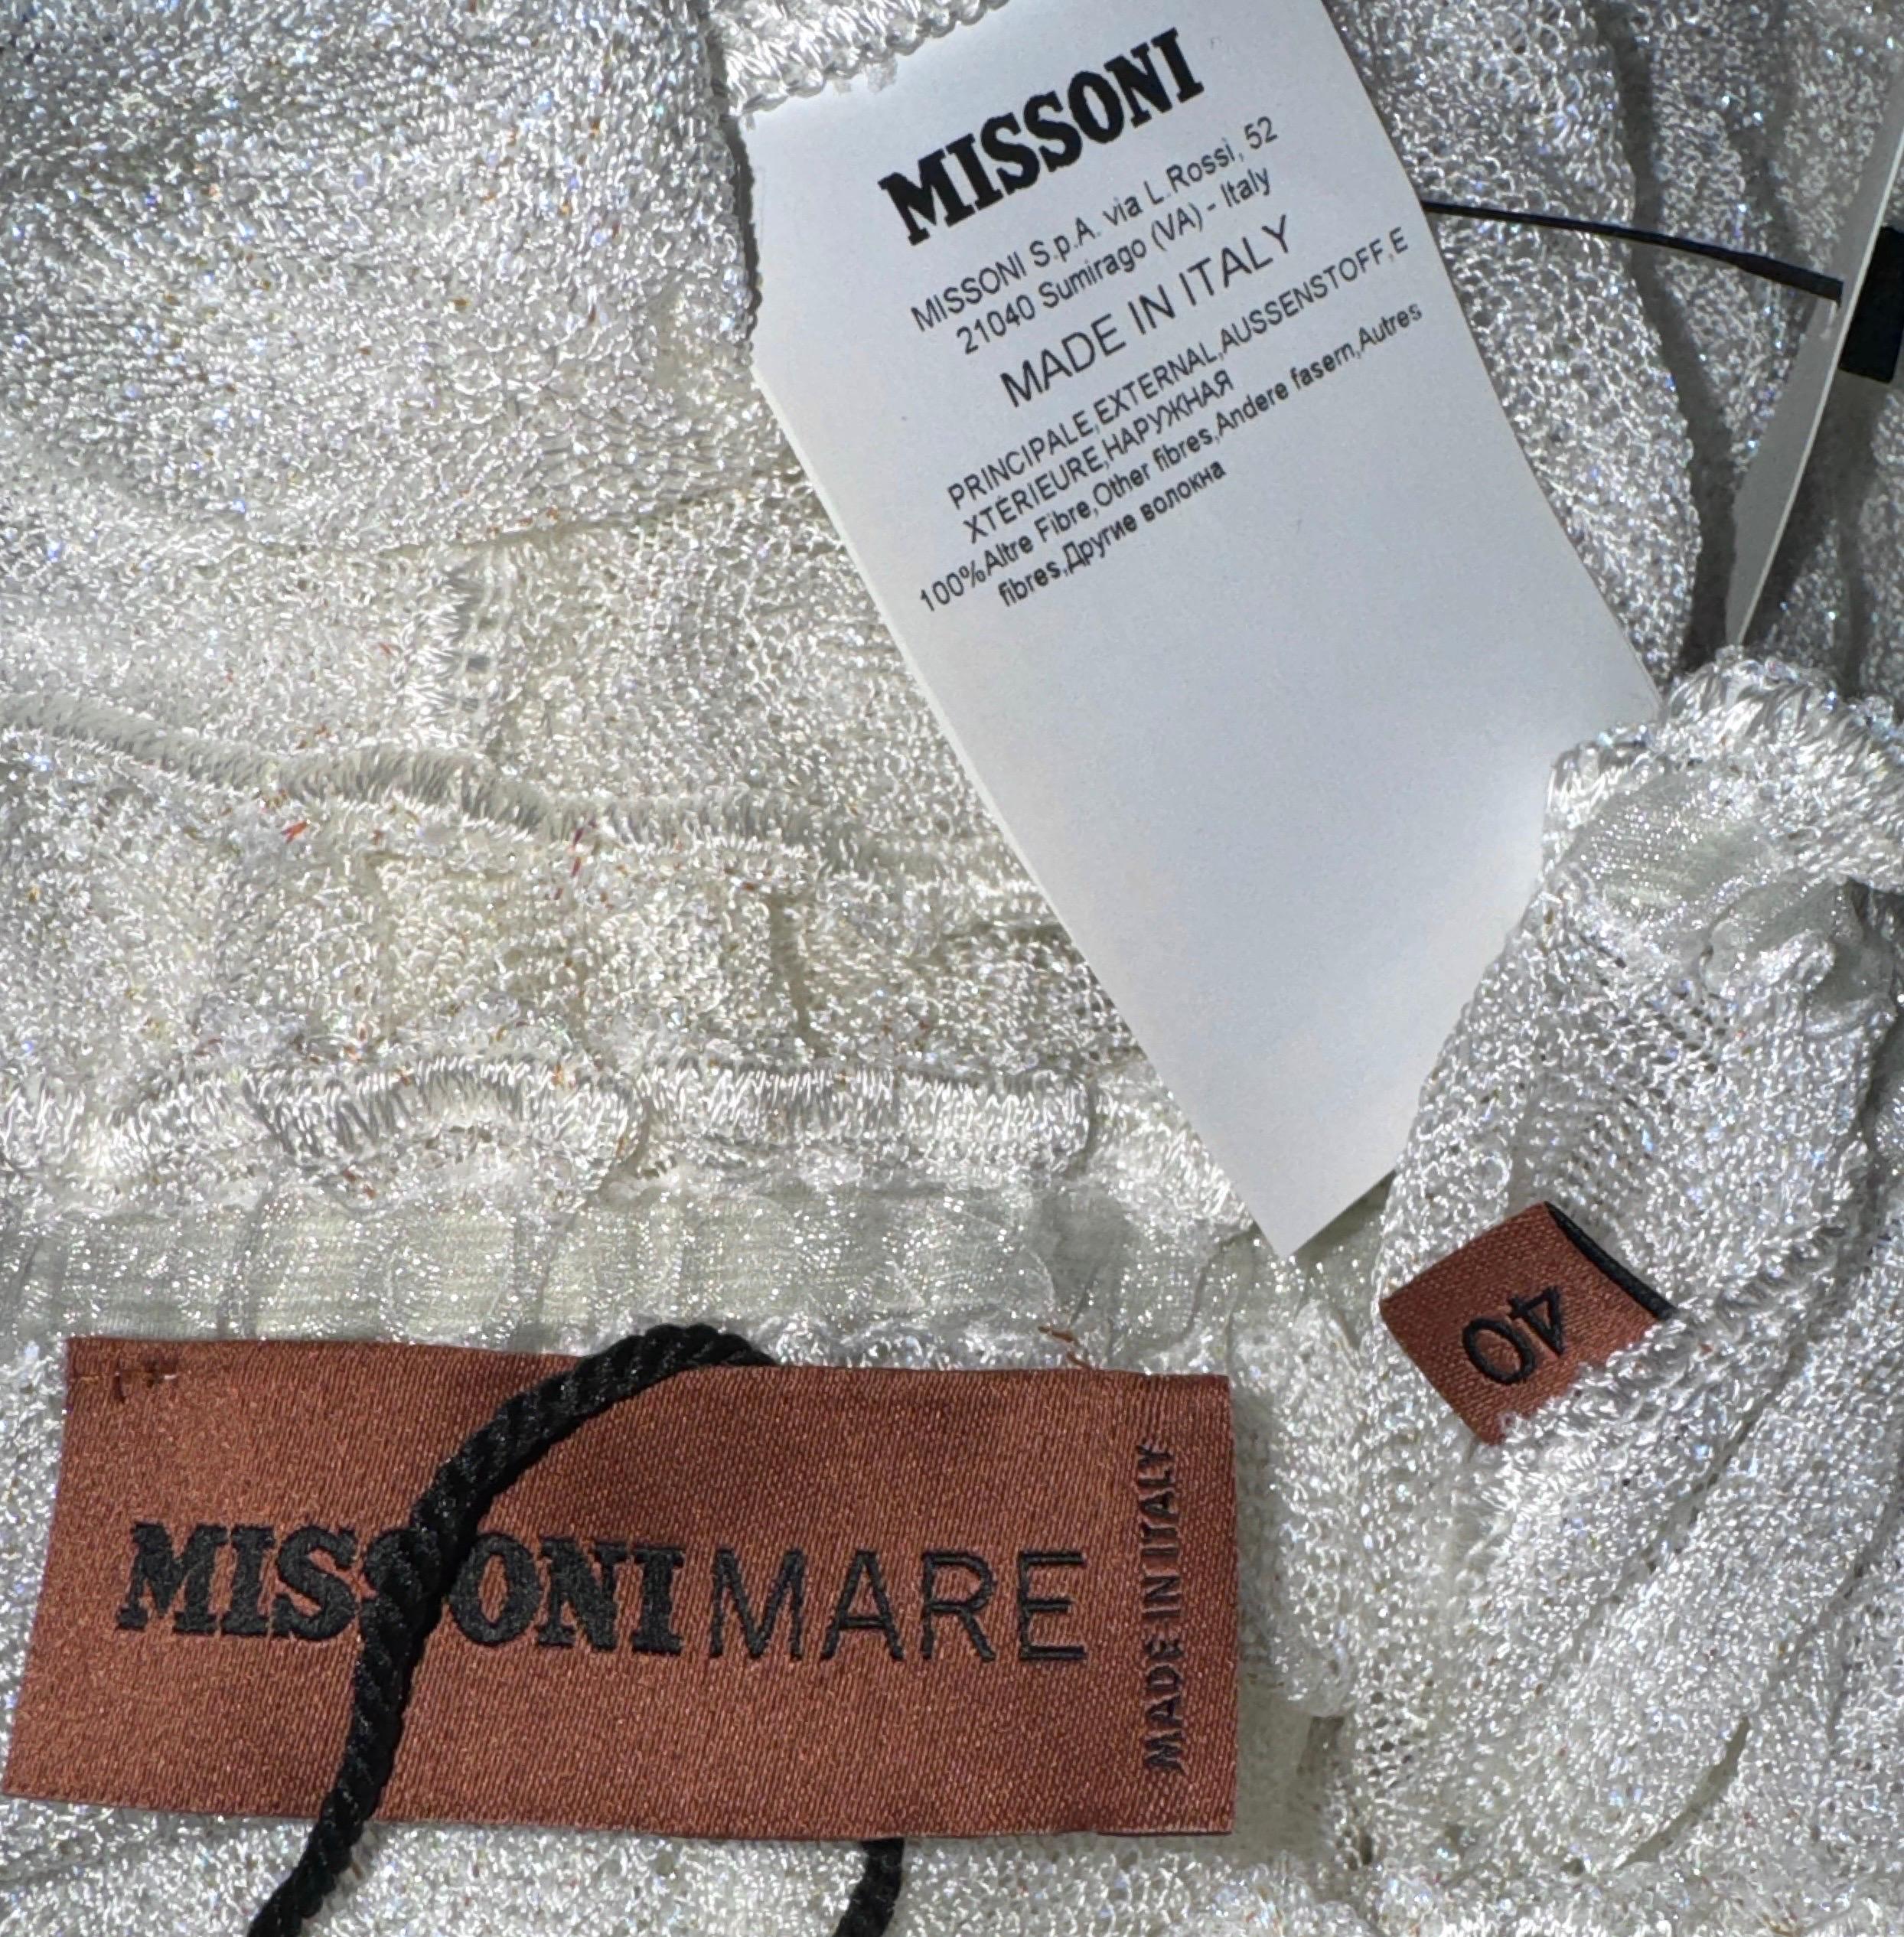 NEW Missoni Crochet Knit Shimmers Bridal Engegement Cover Up Dress 40 For Sale 3